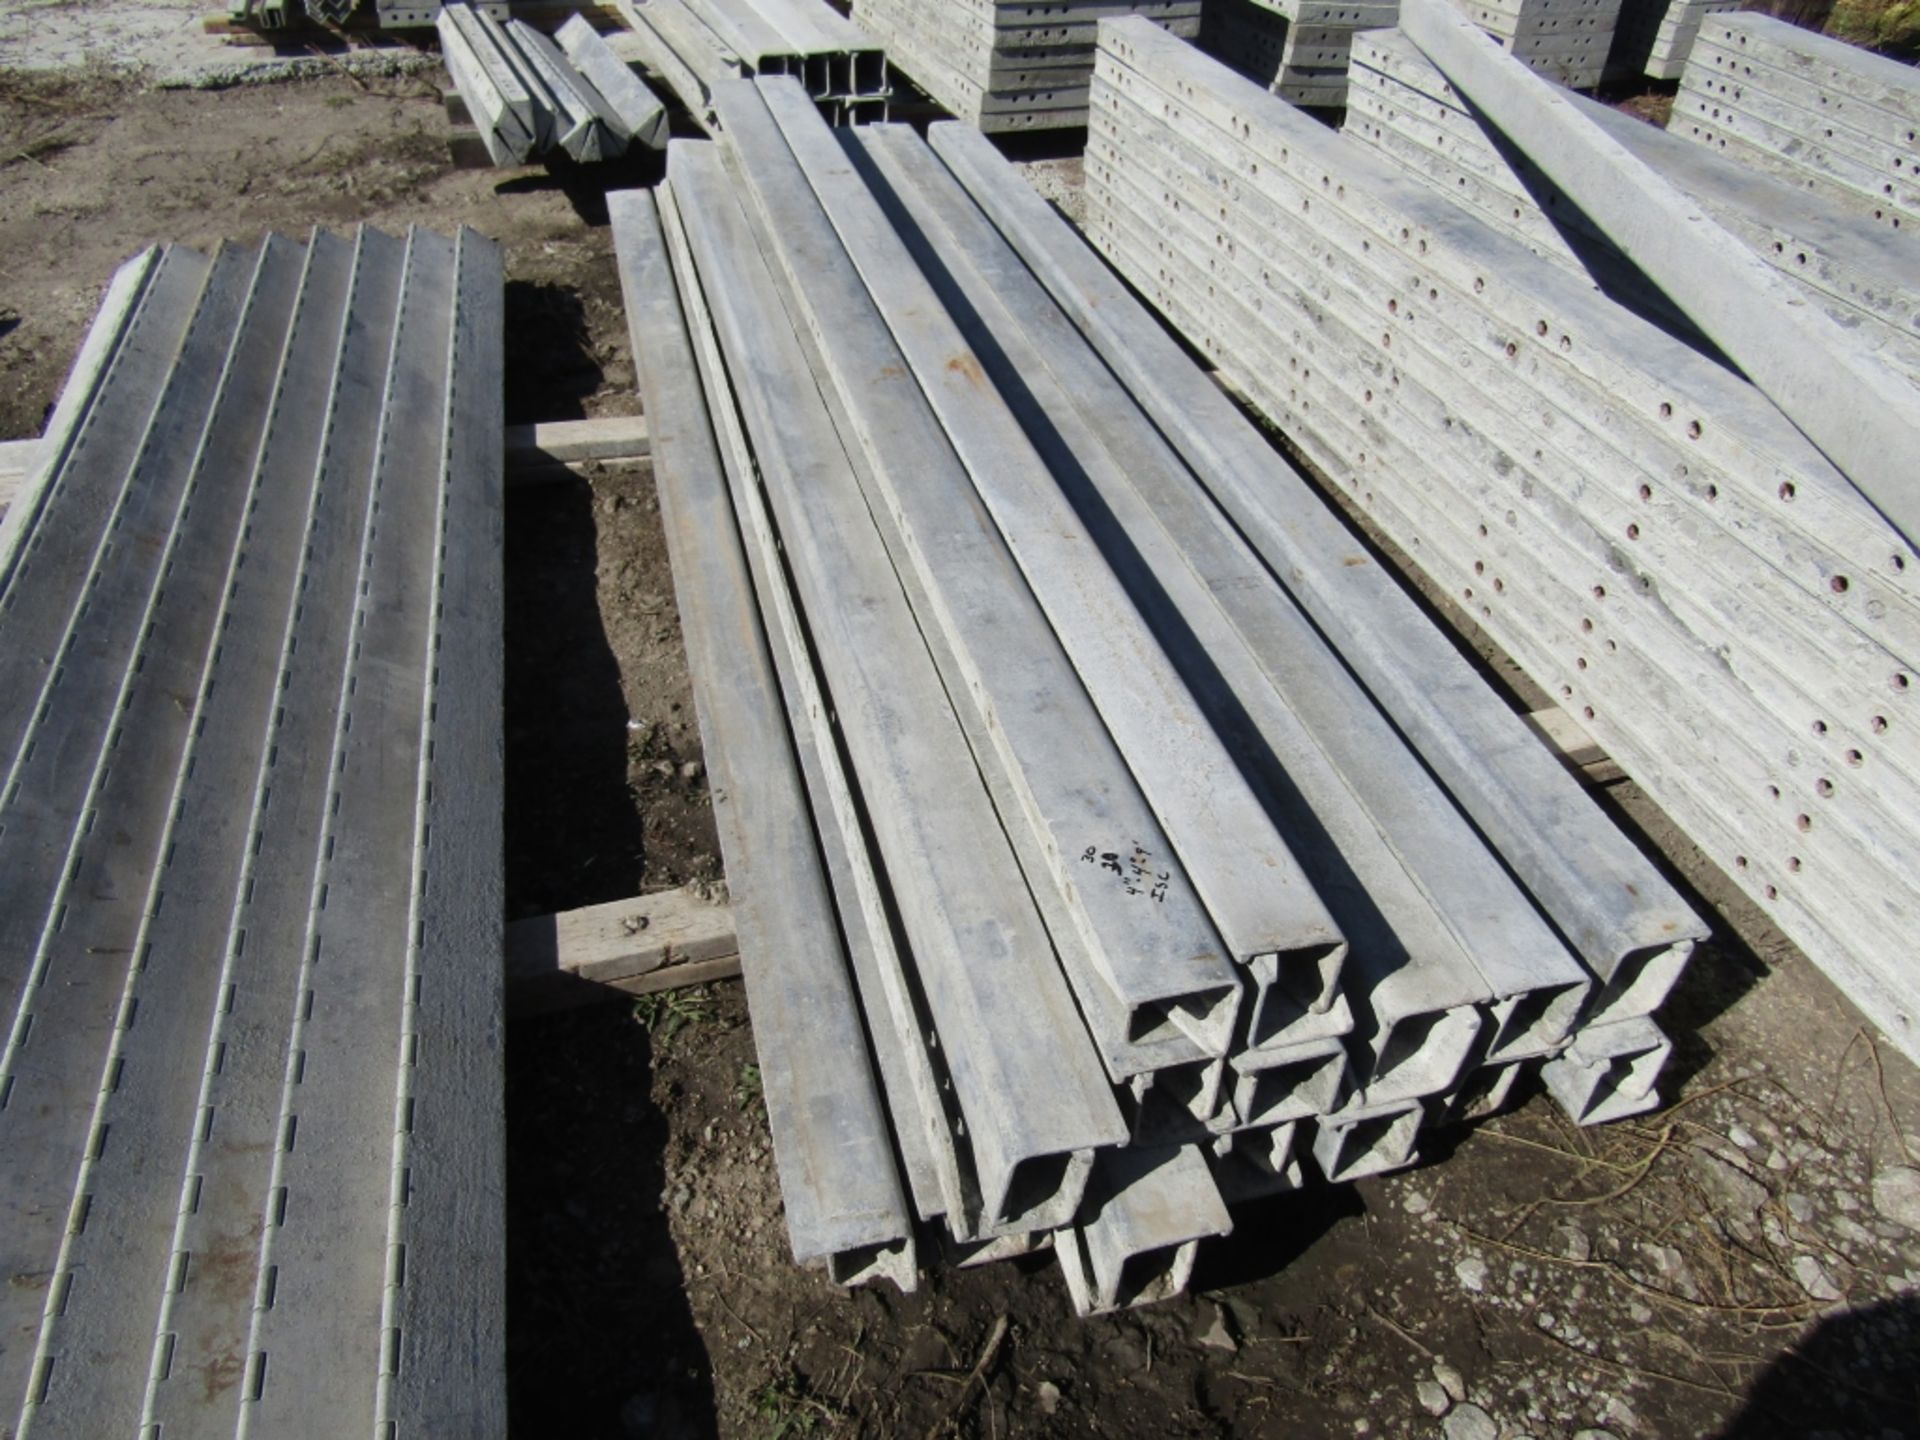 (30)4"x4" x 9' Nominal ISC Wall Ties Concrete Form, Smooth, 6-12 Hole Pattern, Triple Punch, Located